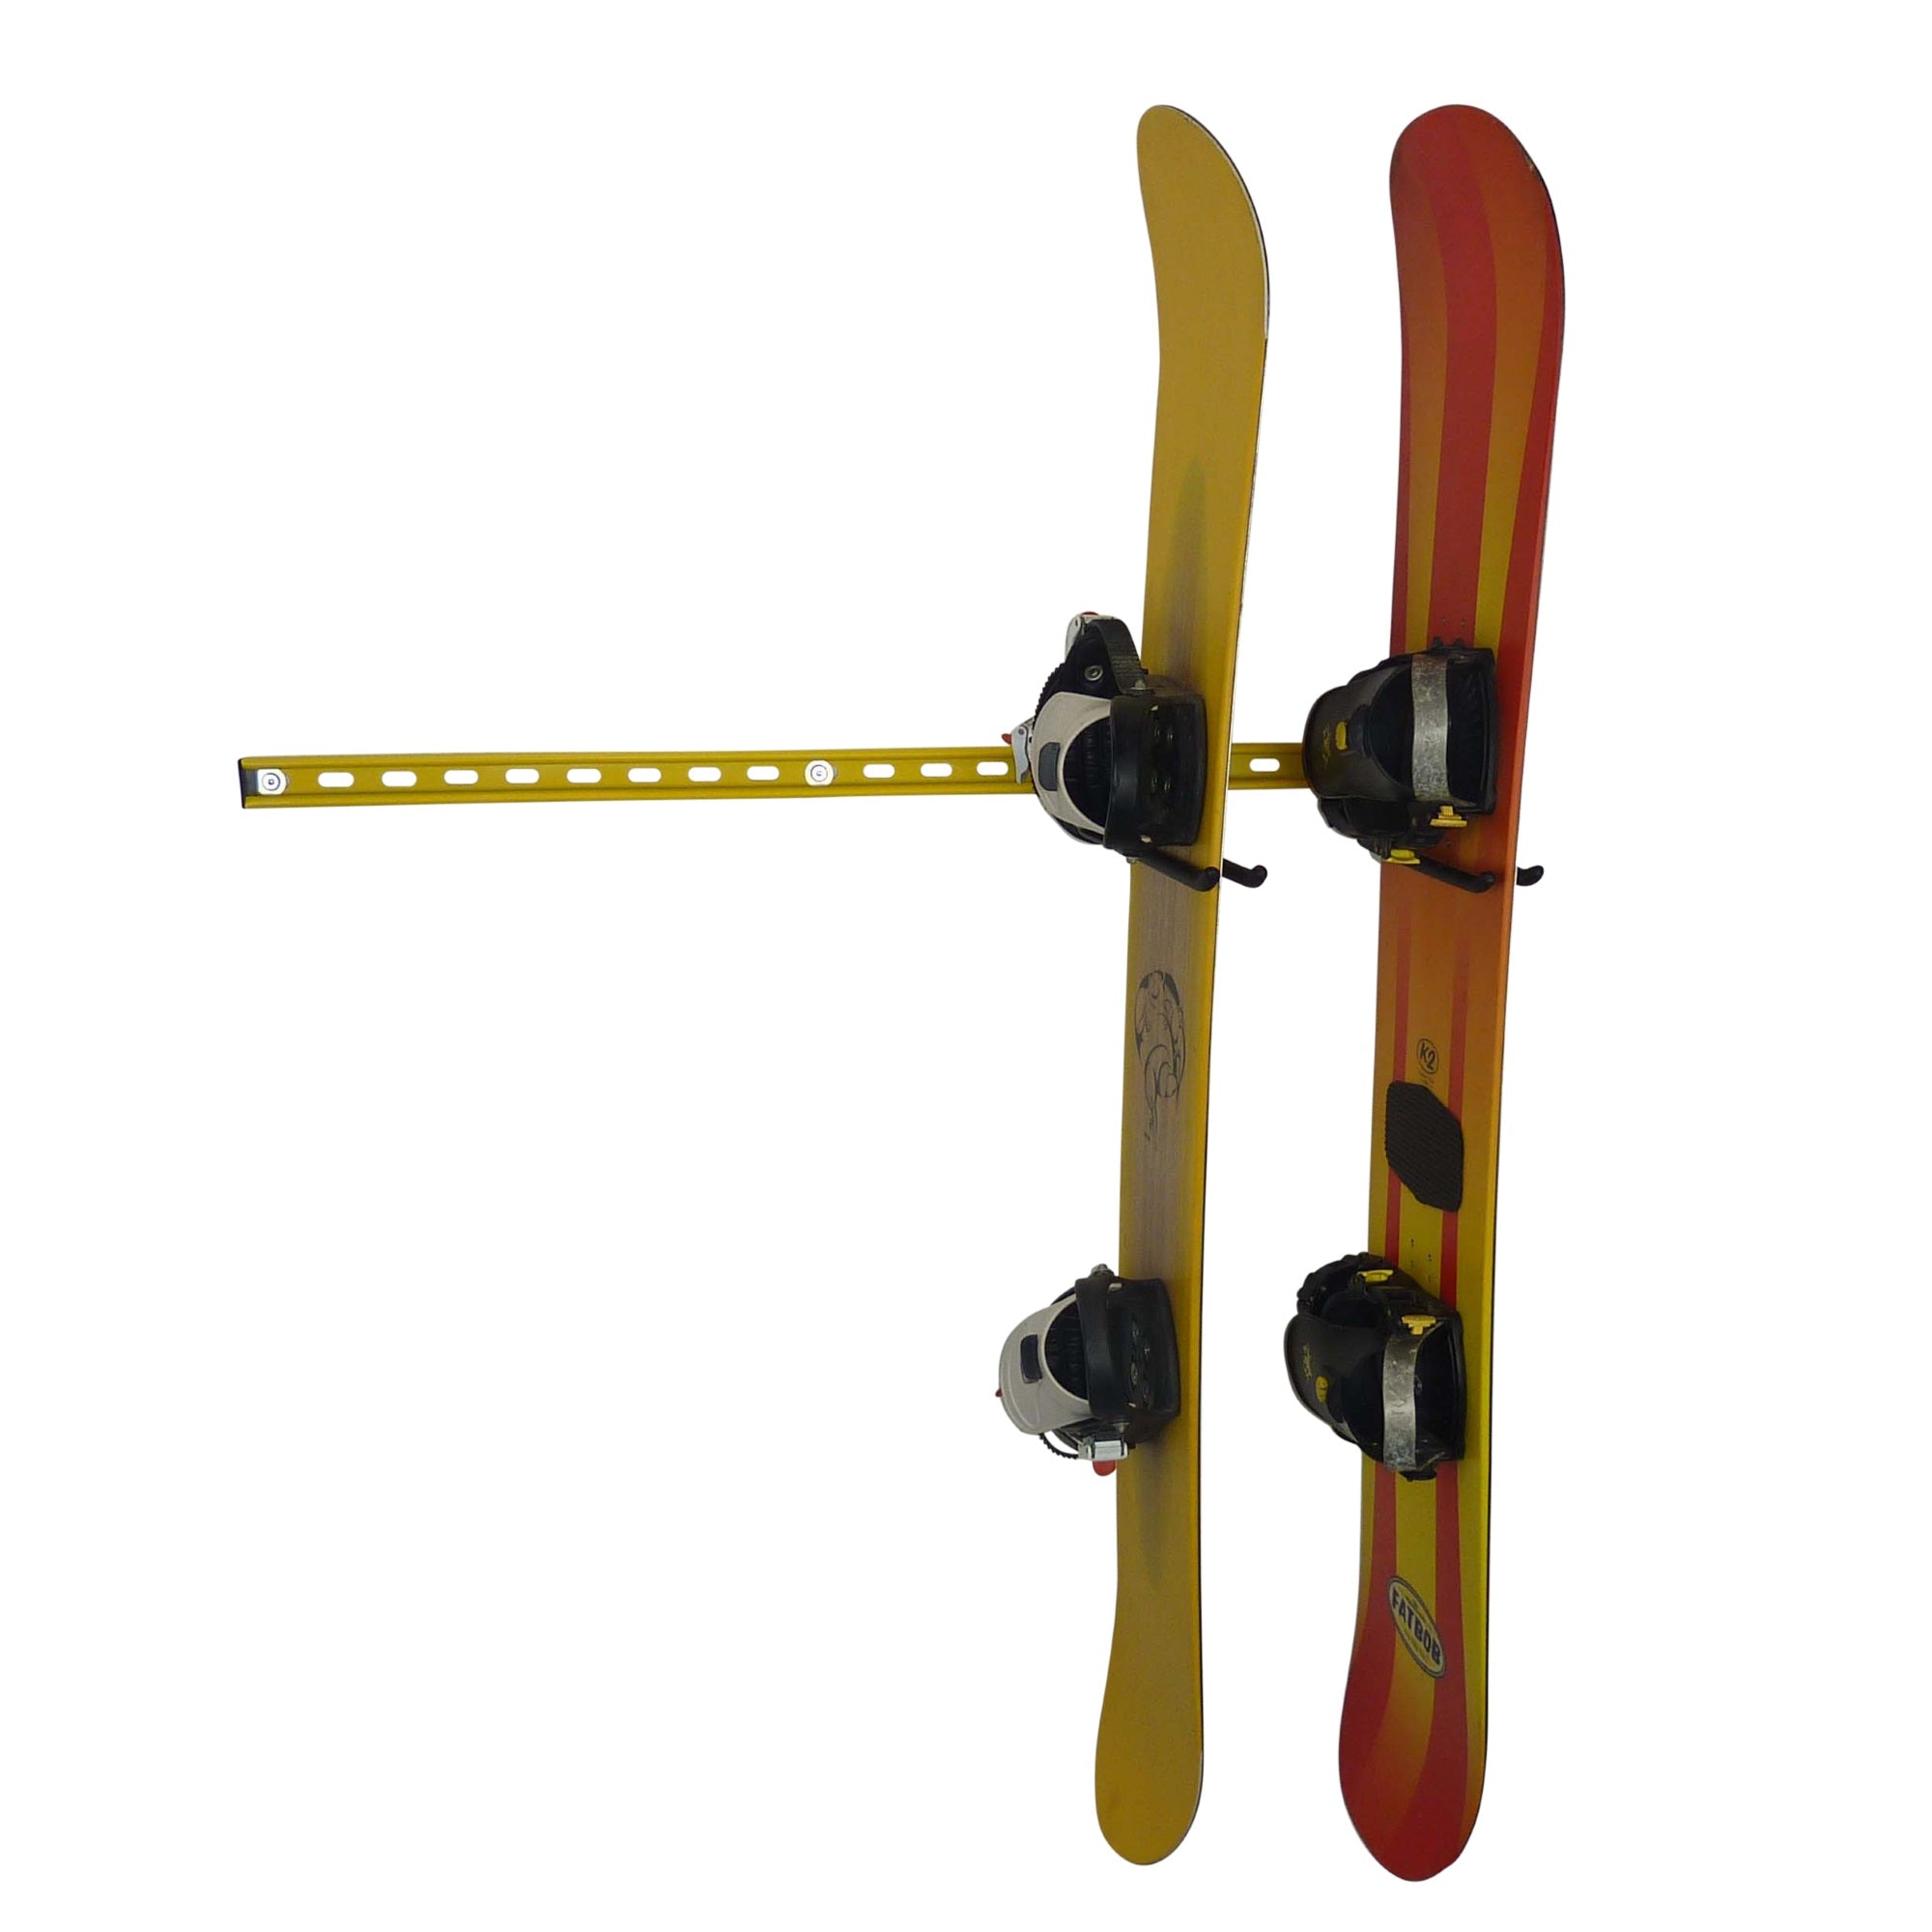 Snowboard wall rack. Wall mounting snowboard rack for 2 snowboards